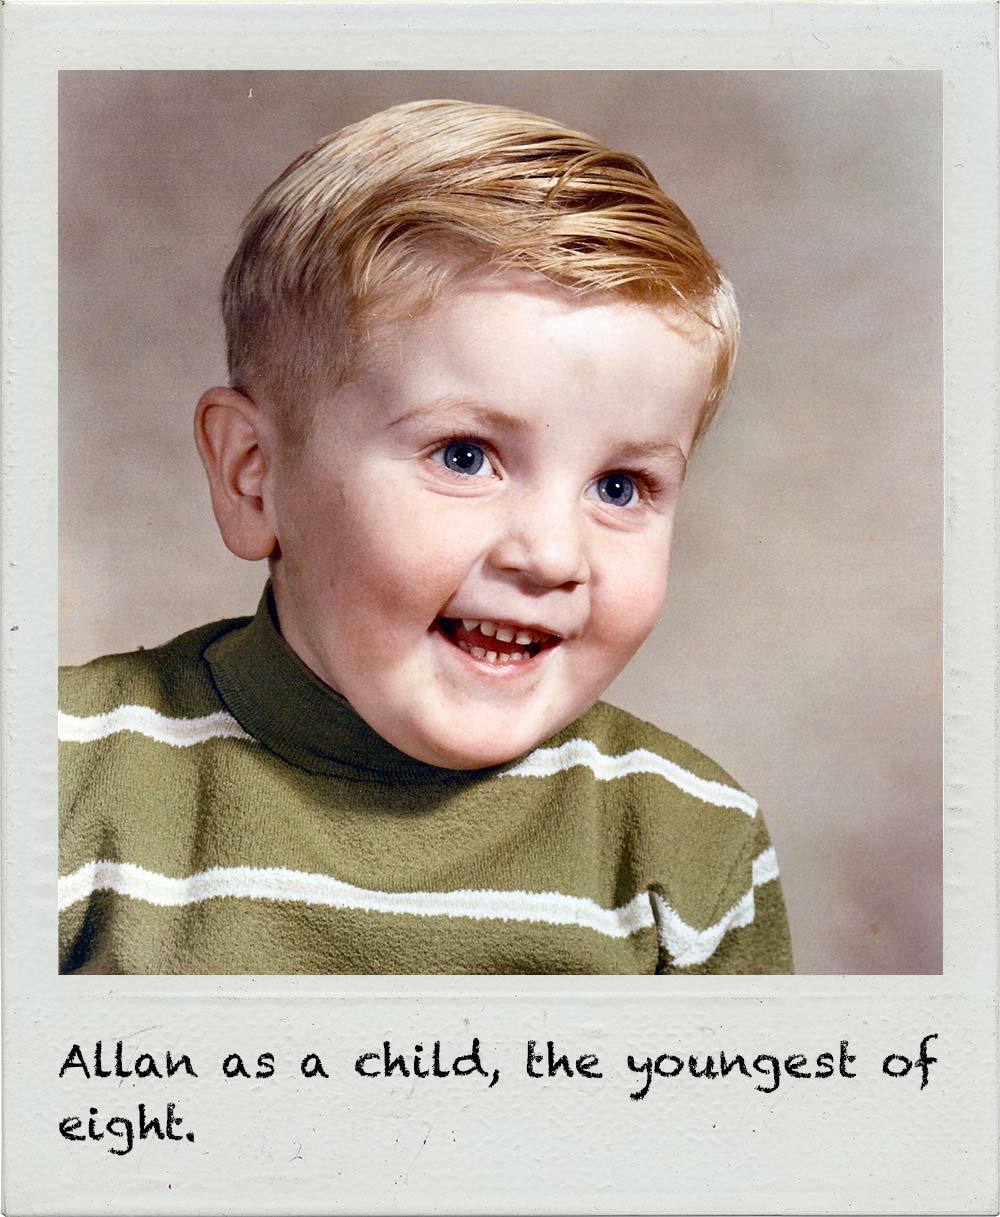 Allan as a child, the youngest of eight.